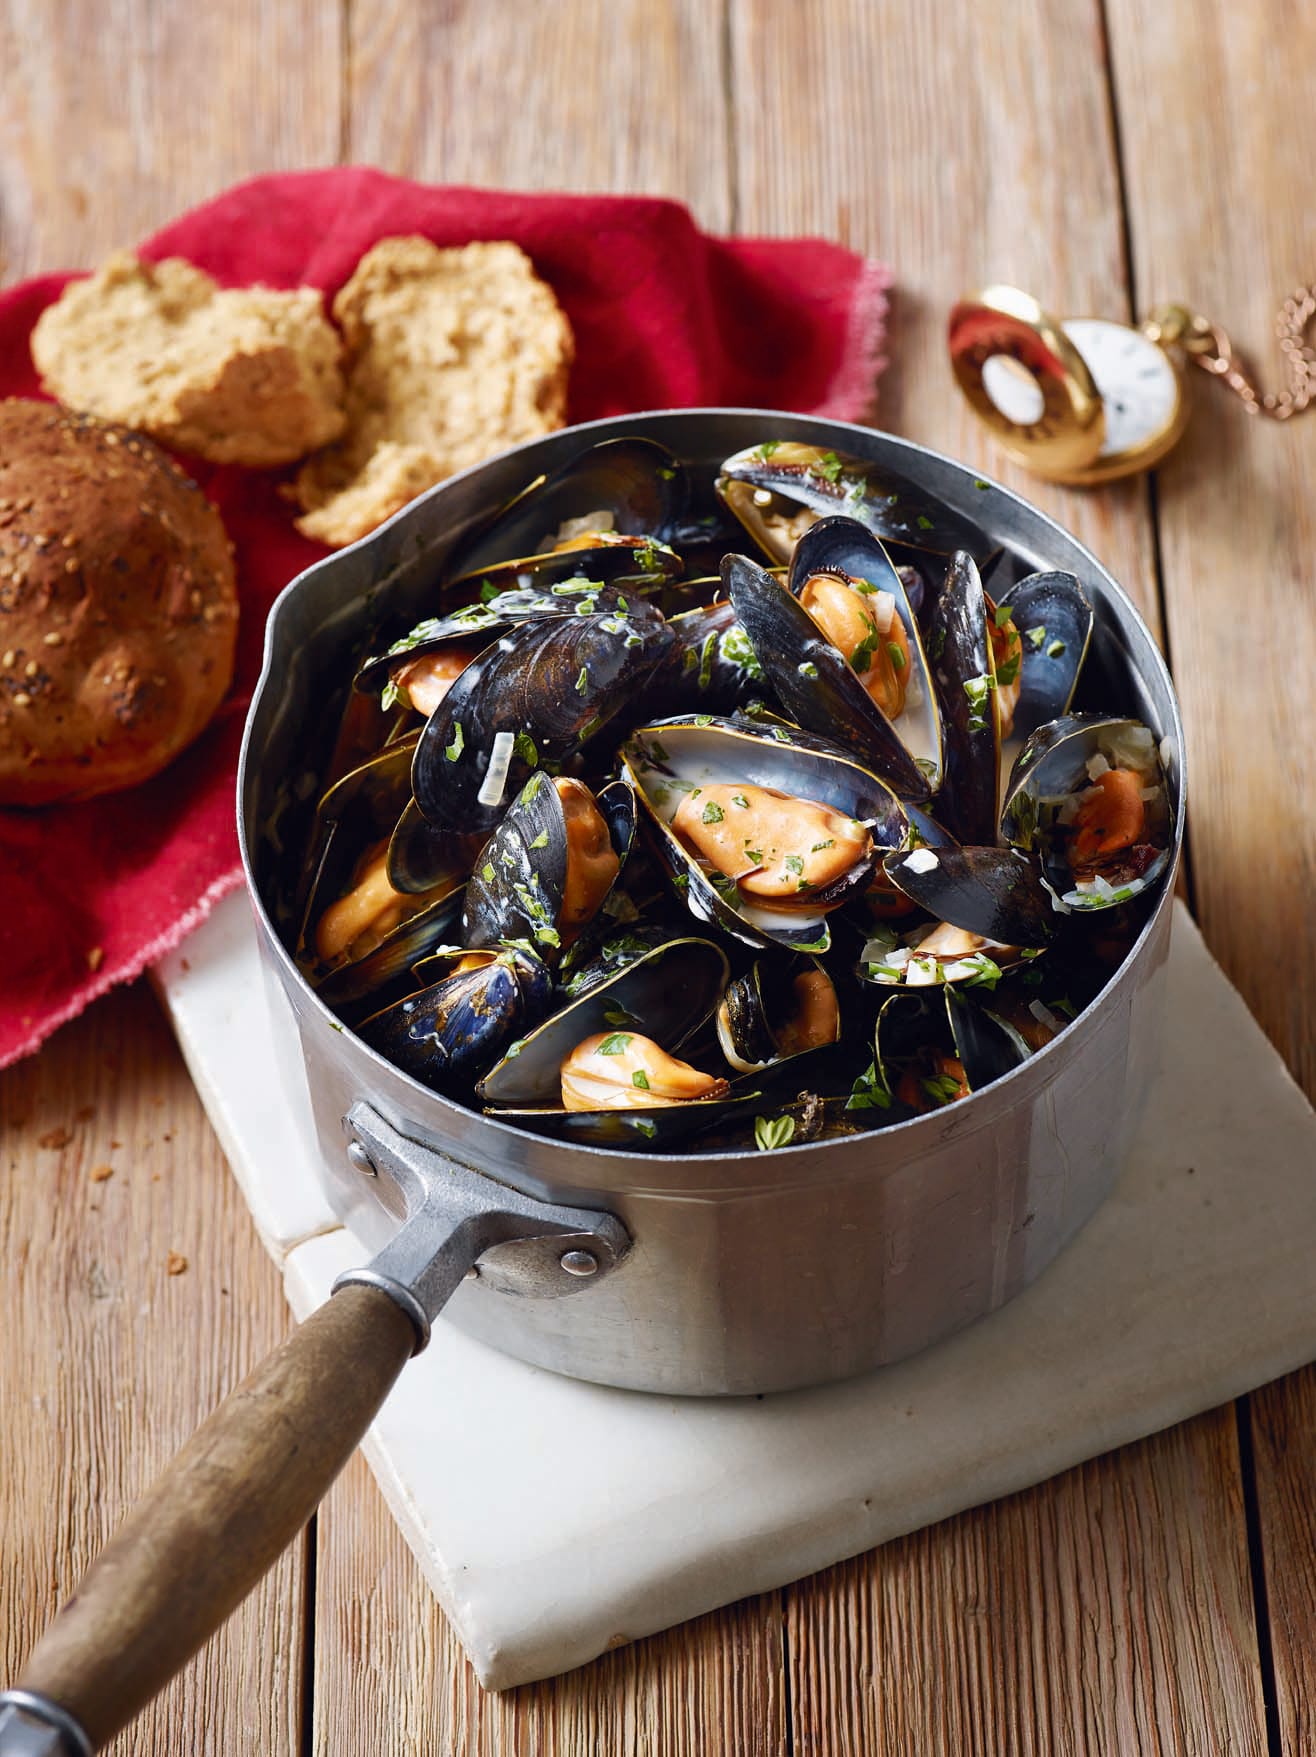 Moules Marinières Recipe (French Mussels in White Wine Sauce)